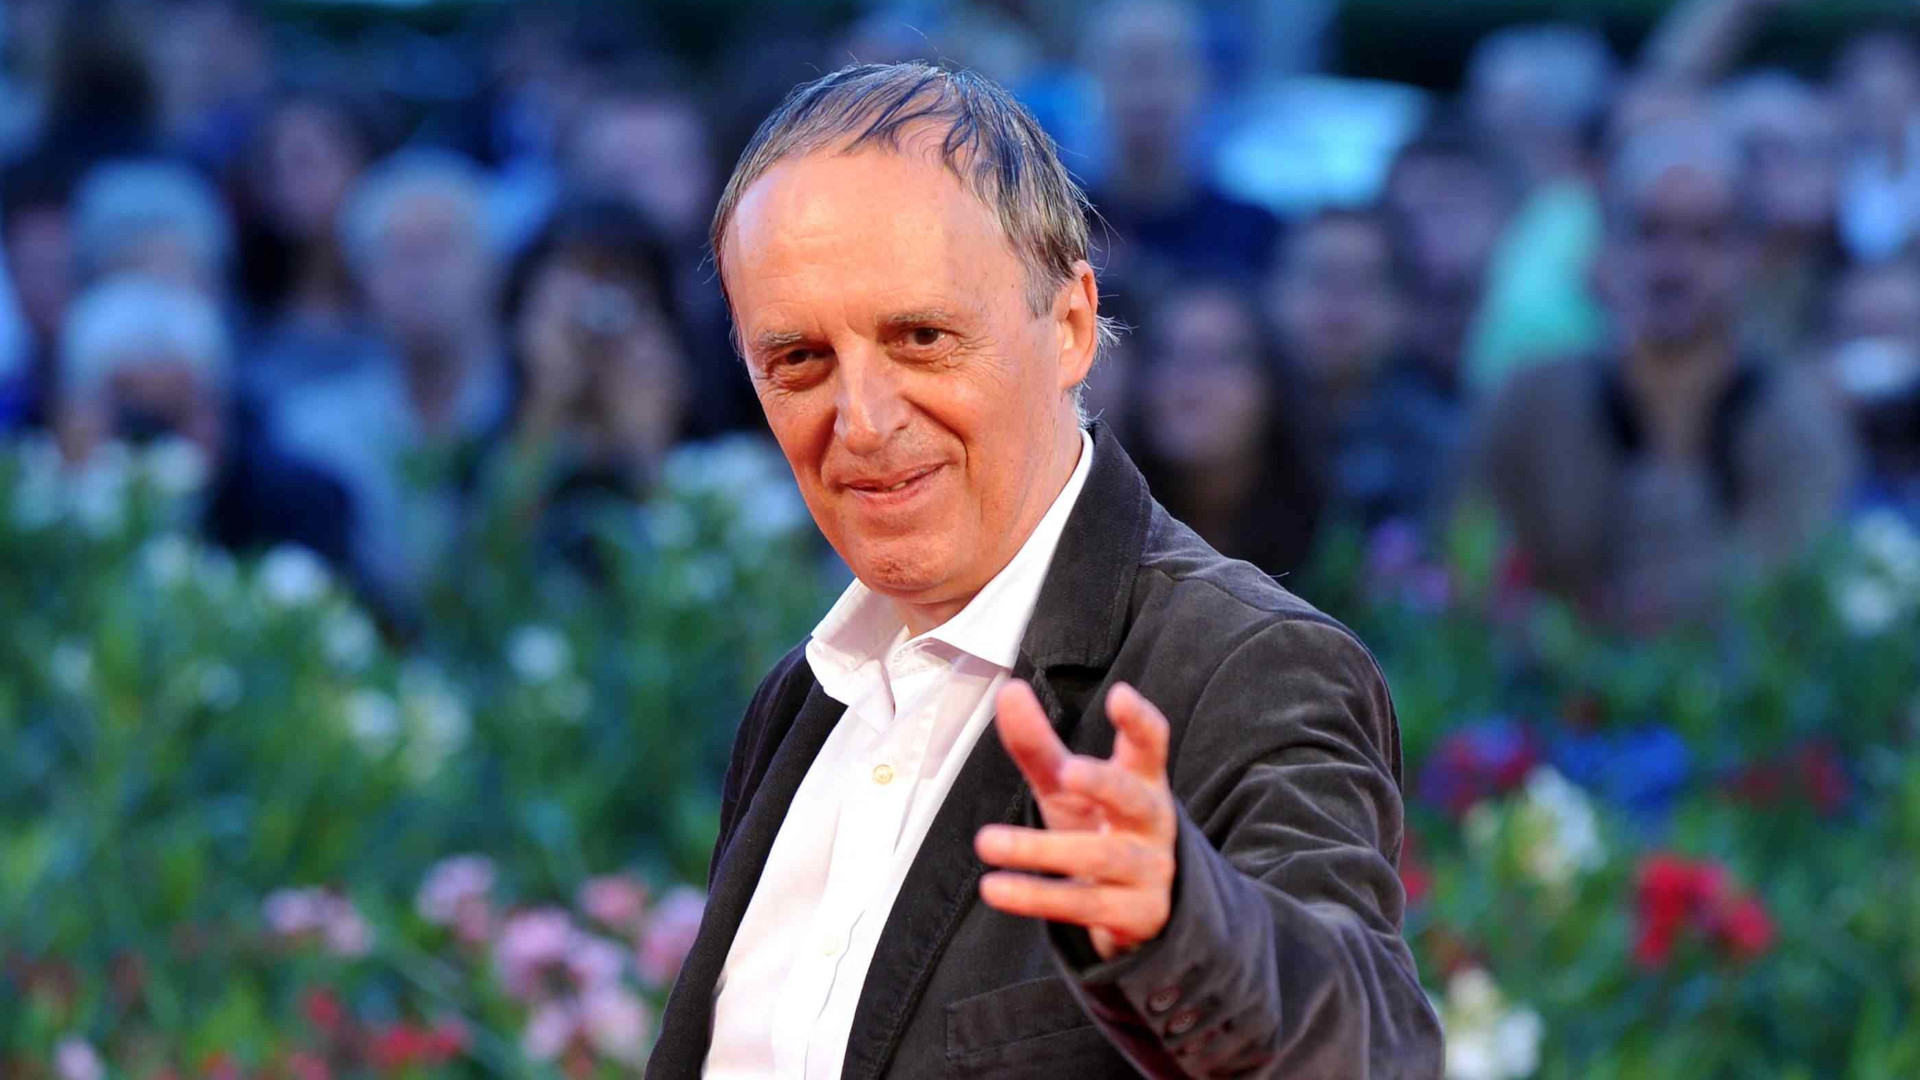 Photo of Dario Argento in a suit at the Venice Film Festival in 2010 with the audience in the background (blurry)